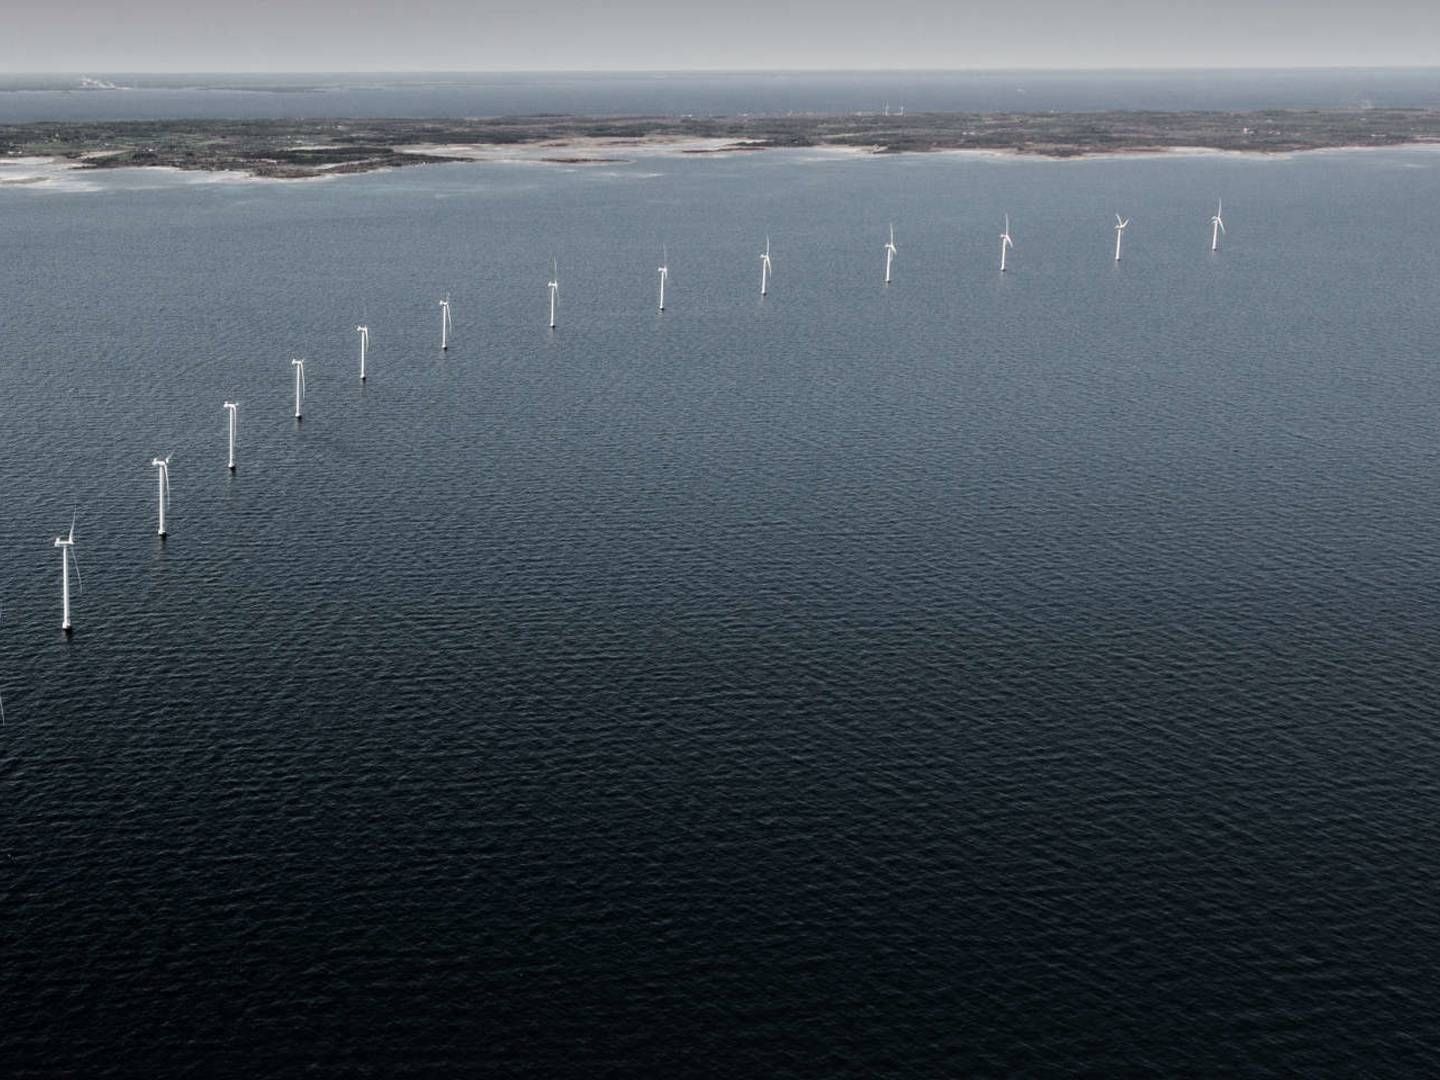 Only 16 older 3MW turbines are found in the waters between the islands of Öland and Gotland at present. This could change drastically in the future. | Photo: RWE Renewables